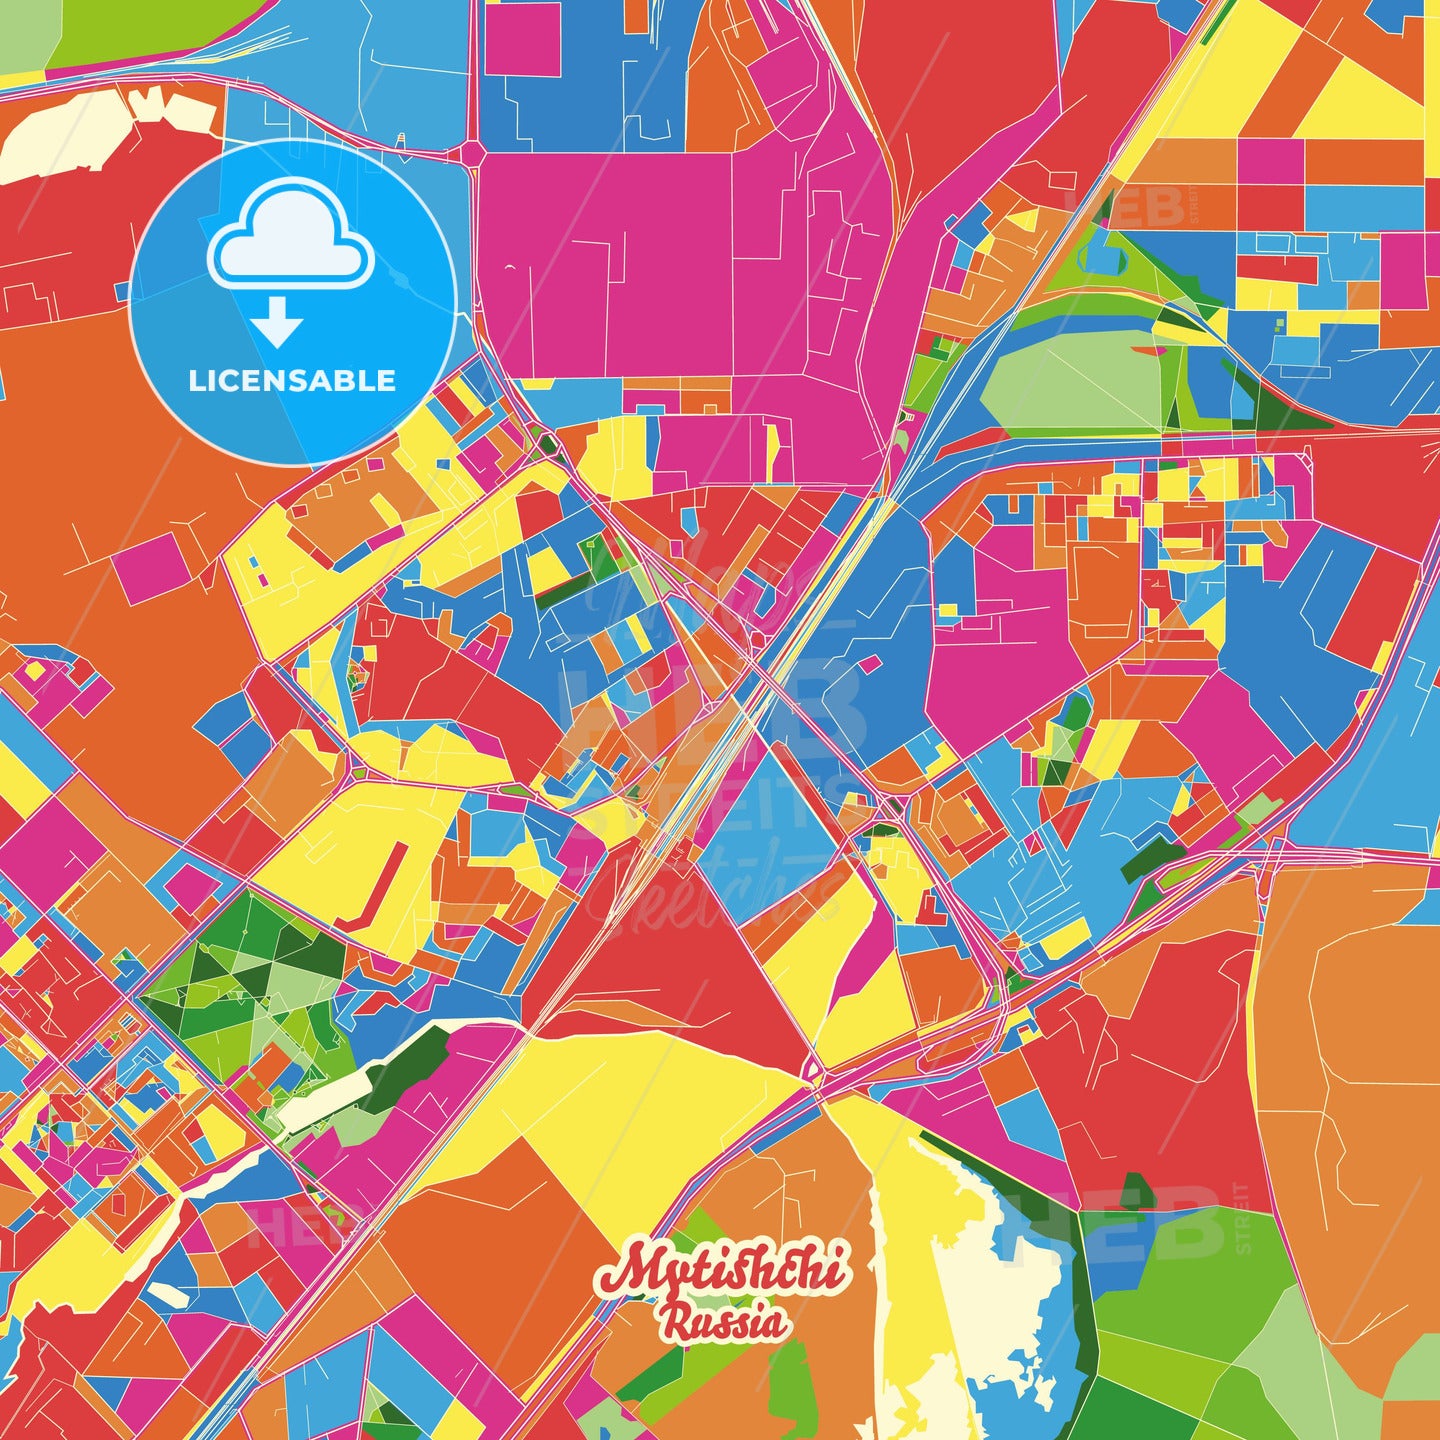 Mytishchi, Russia Crazy Colorful Street Map Poster Template - HEBSTREITS Sketches